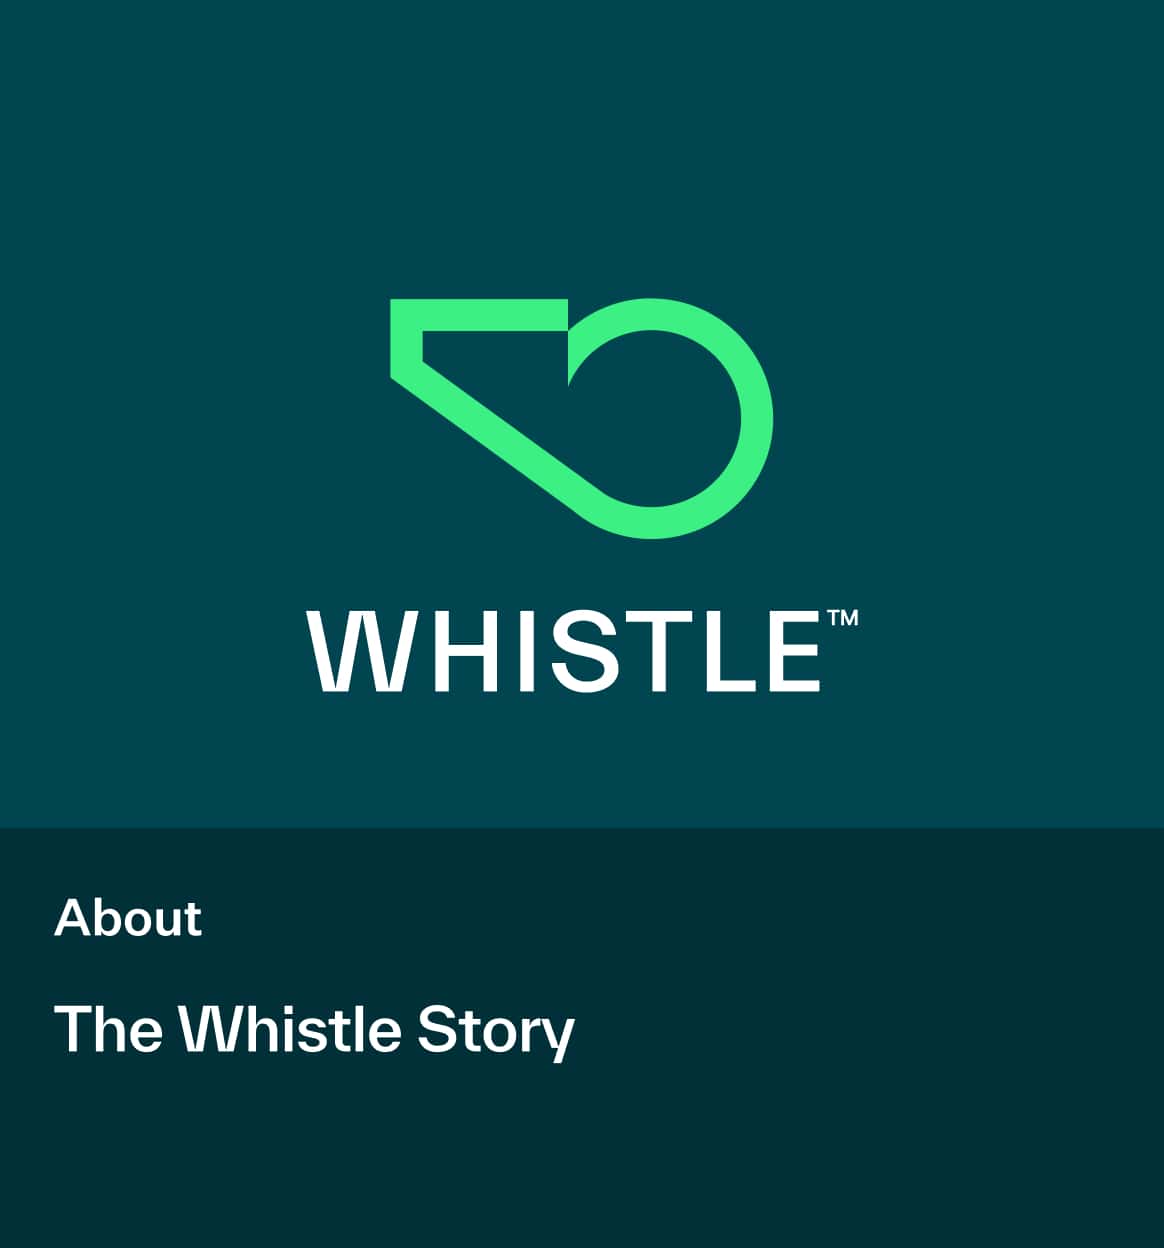 About Whistle